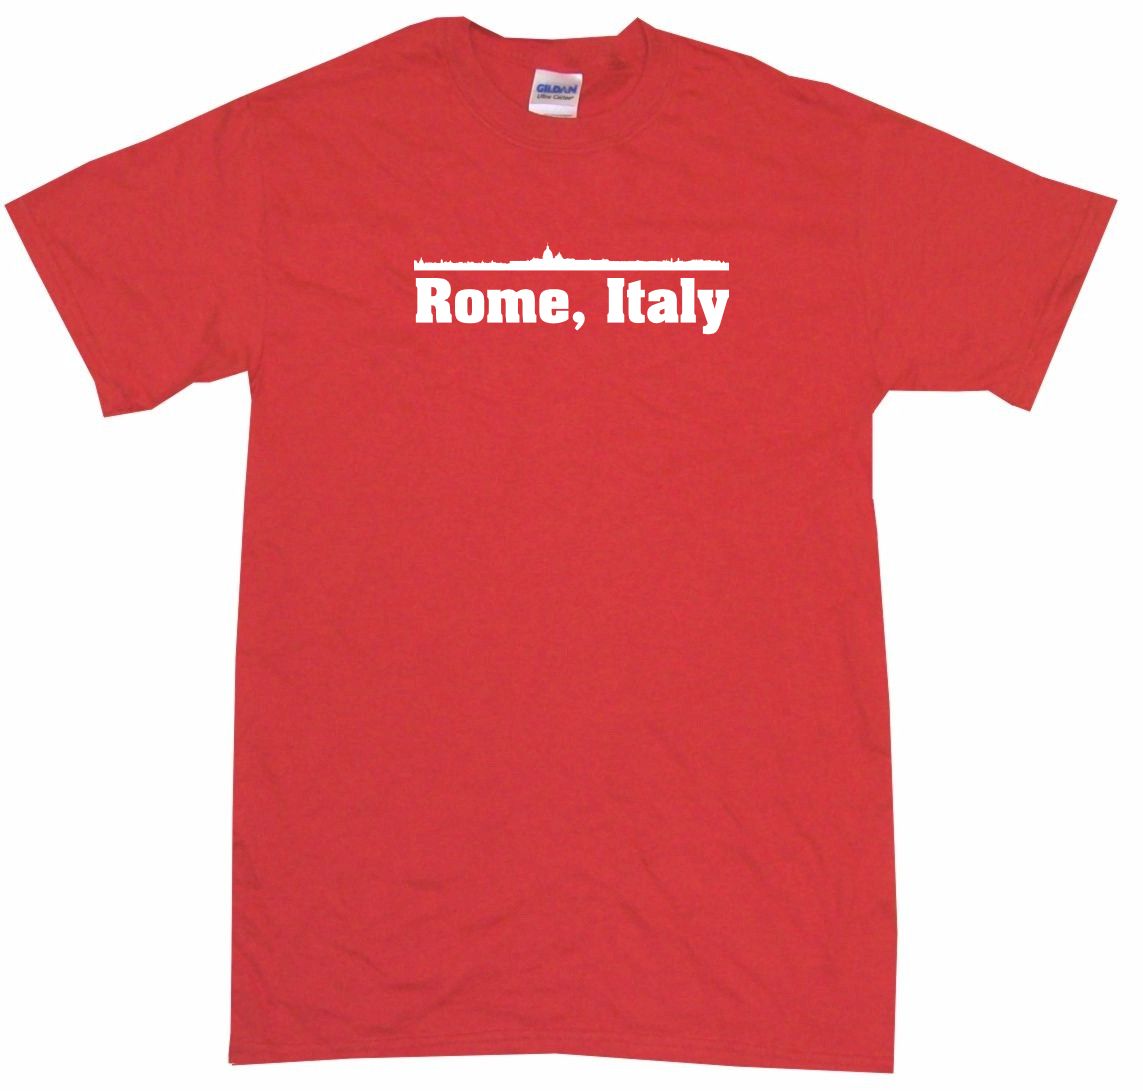 Rome Italy City Scape Kids Tee Shirt Pick Size Color 2T-XL 